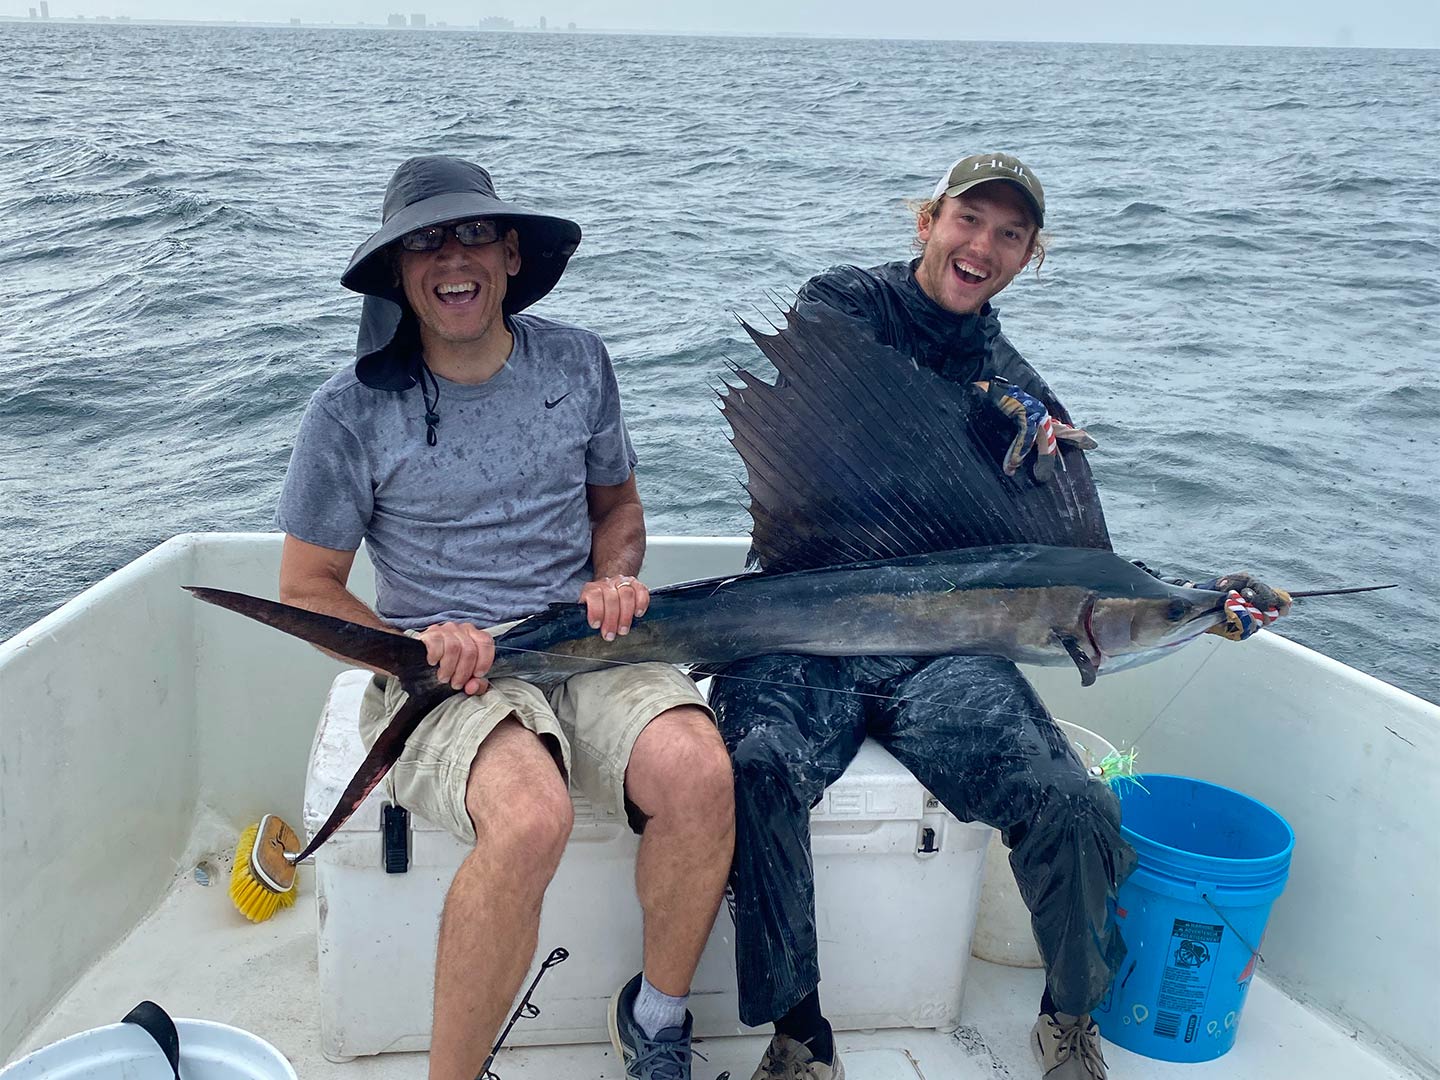 Two anglers hold a Sailfish aboard a boat with Gulf Shores in the distant background